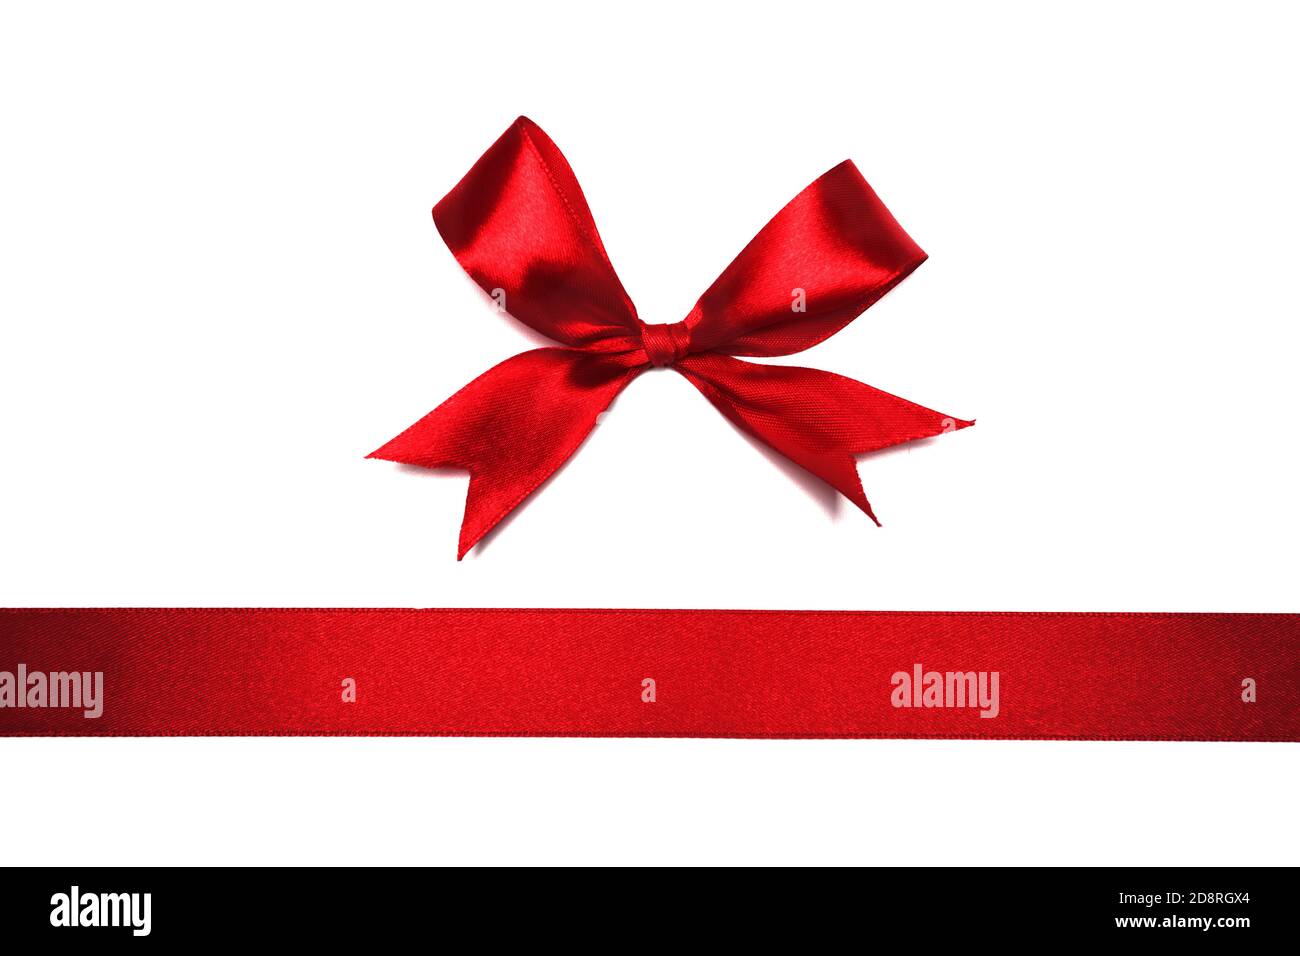 Bright red bow isolated over white background Stock Photo